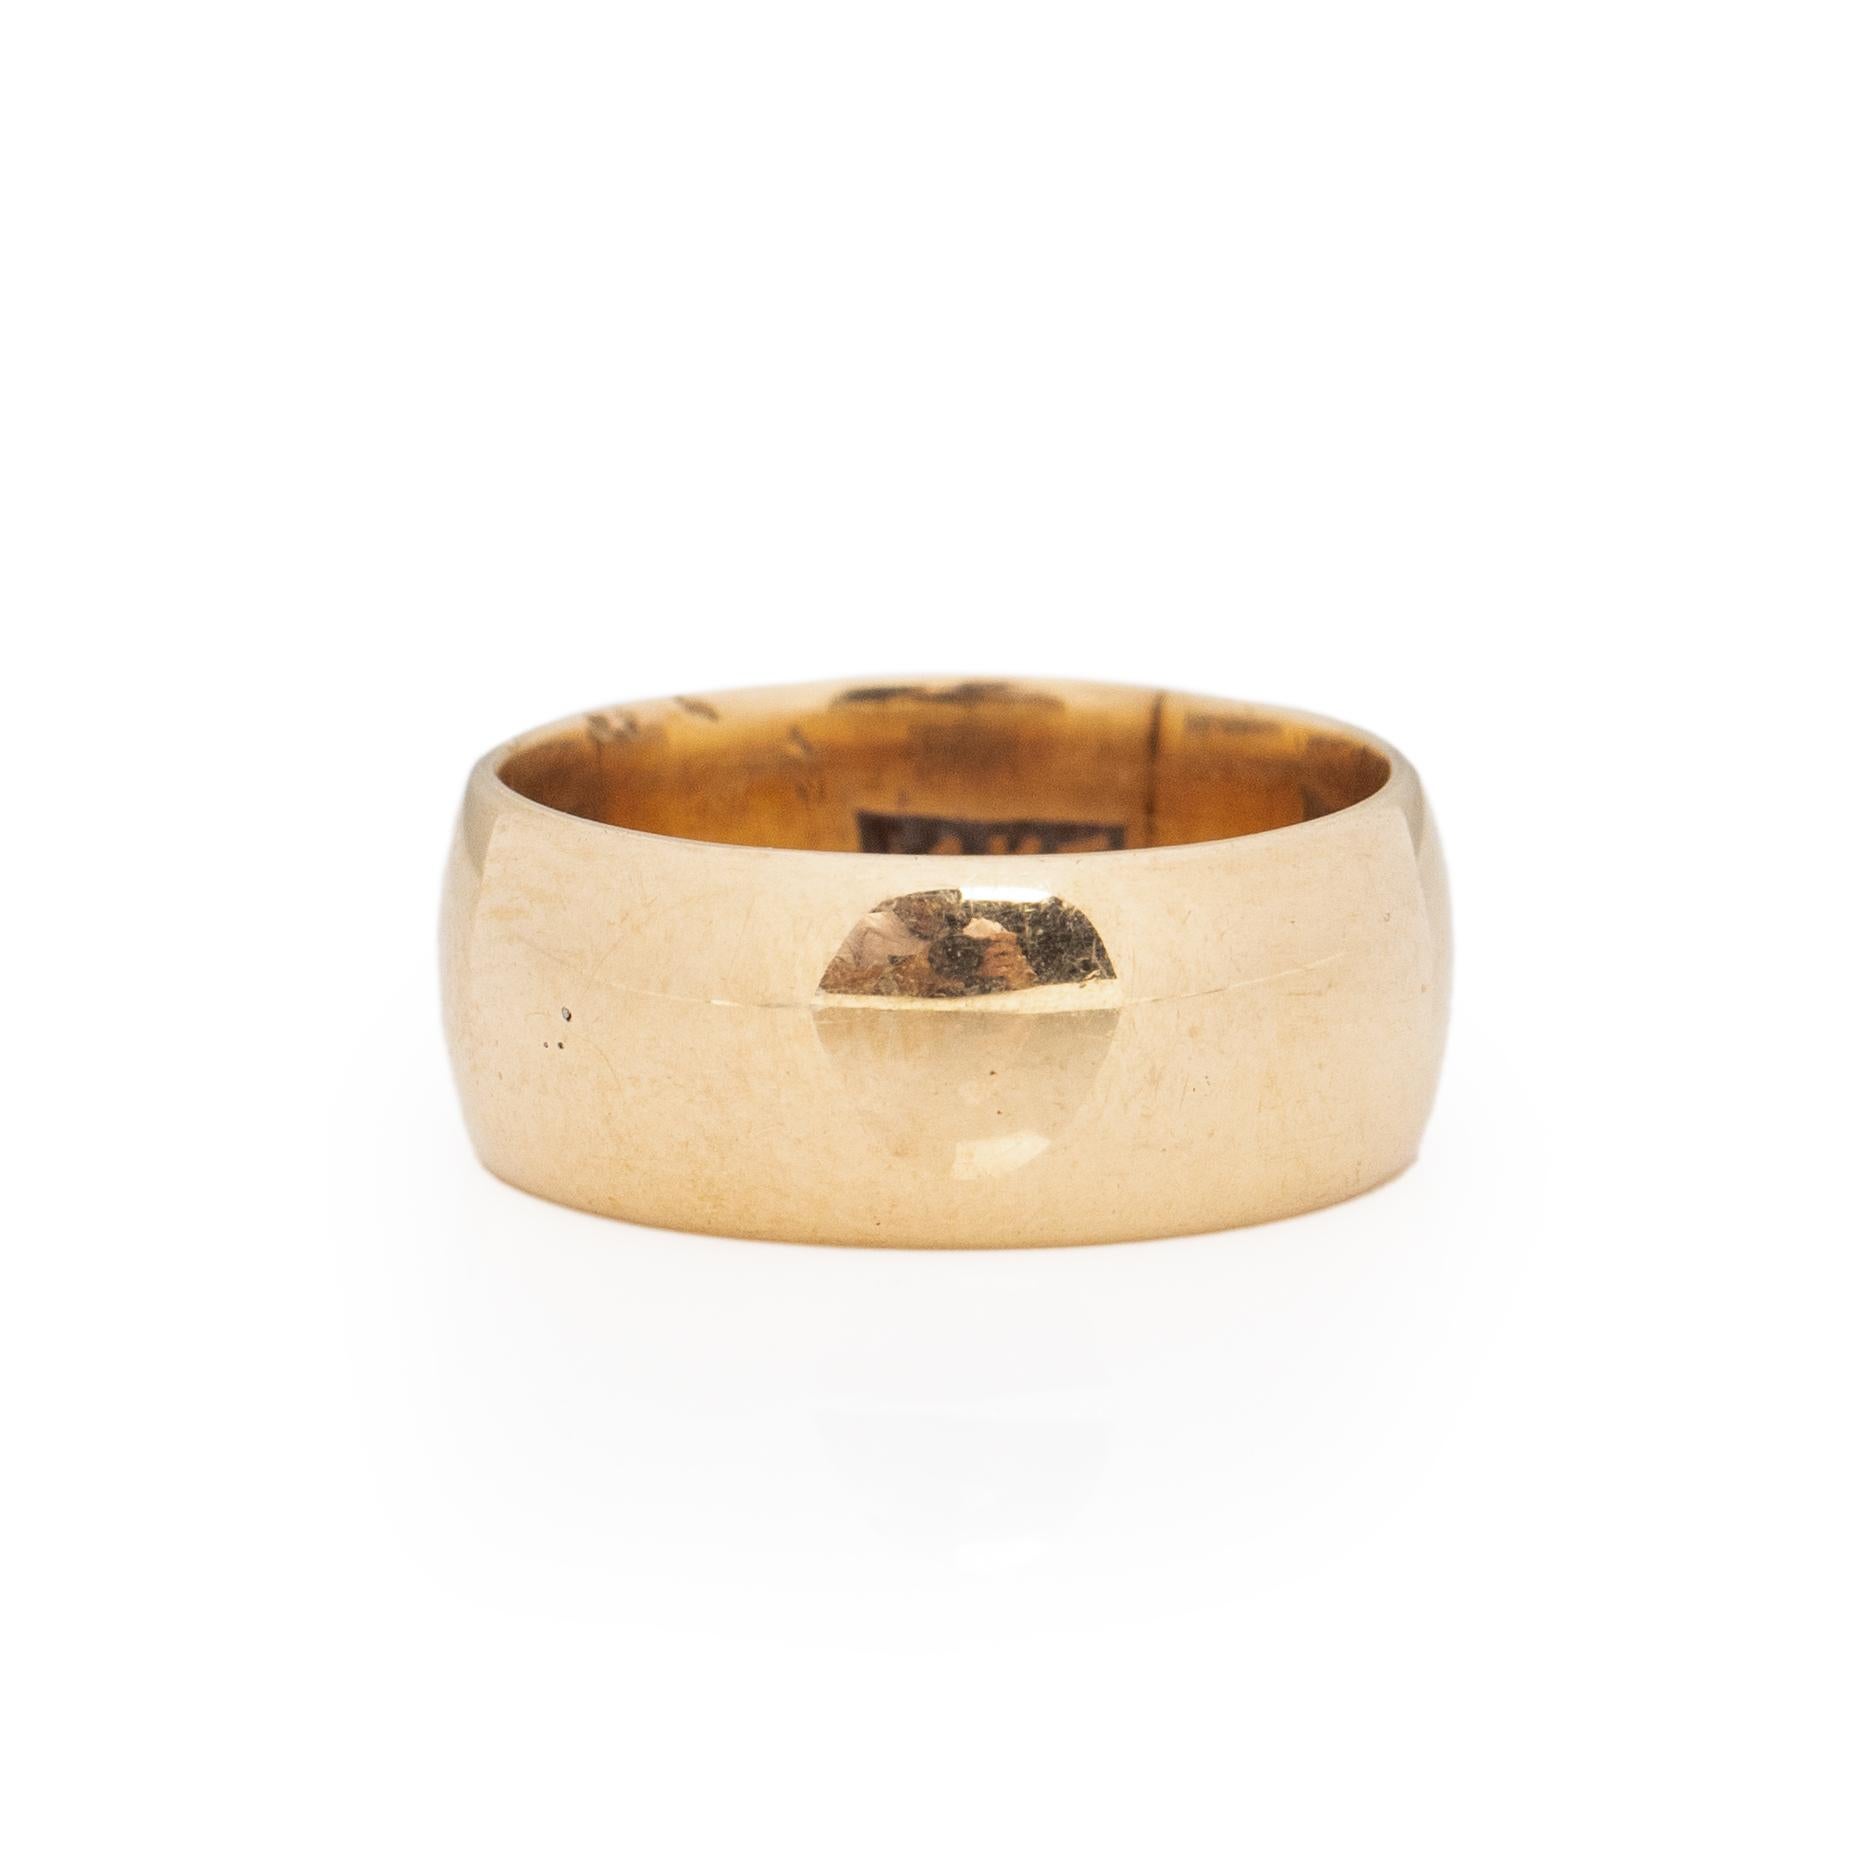 Here we have a classic smooth finish wide band, this piece is timeless and versatile. Crafted in 14K Yellow Gold this band would be a wonderful addition to a vintage ring collection, stacked with other bands or worn alone. Pairing with wide design